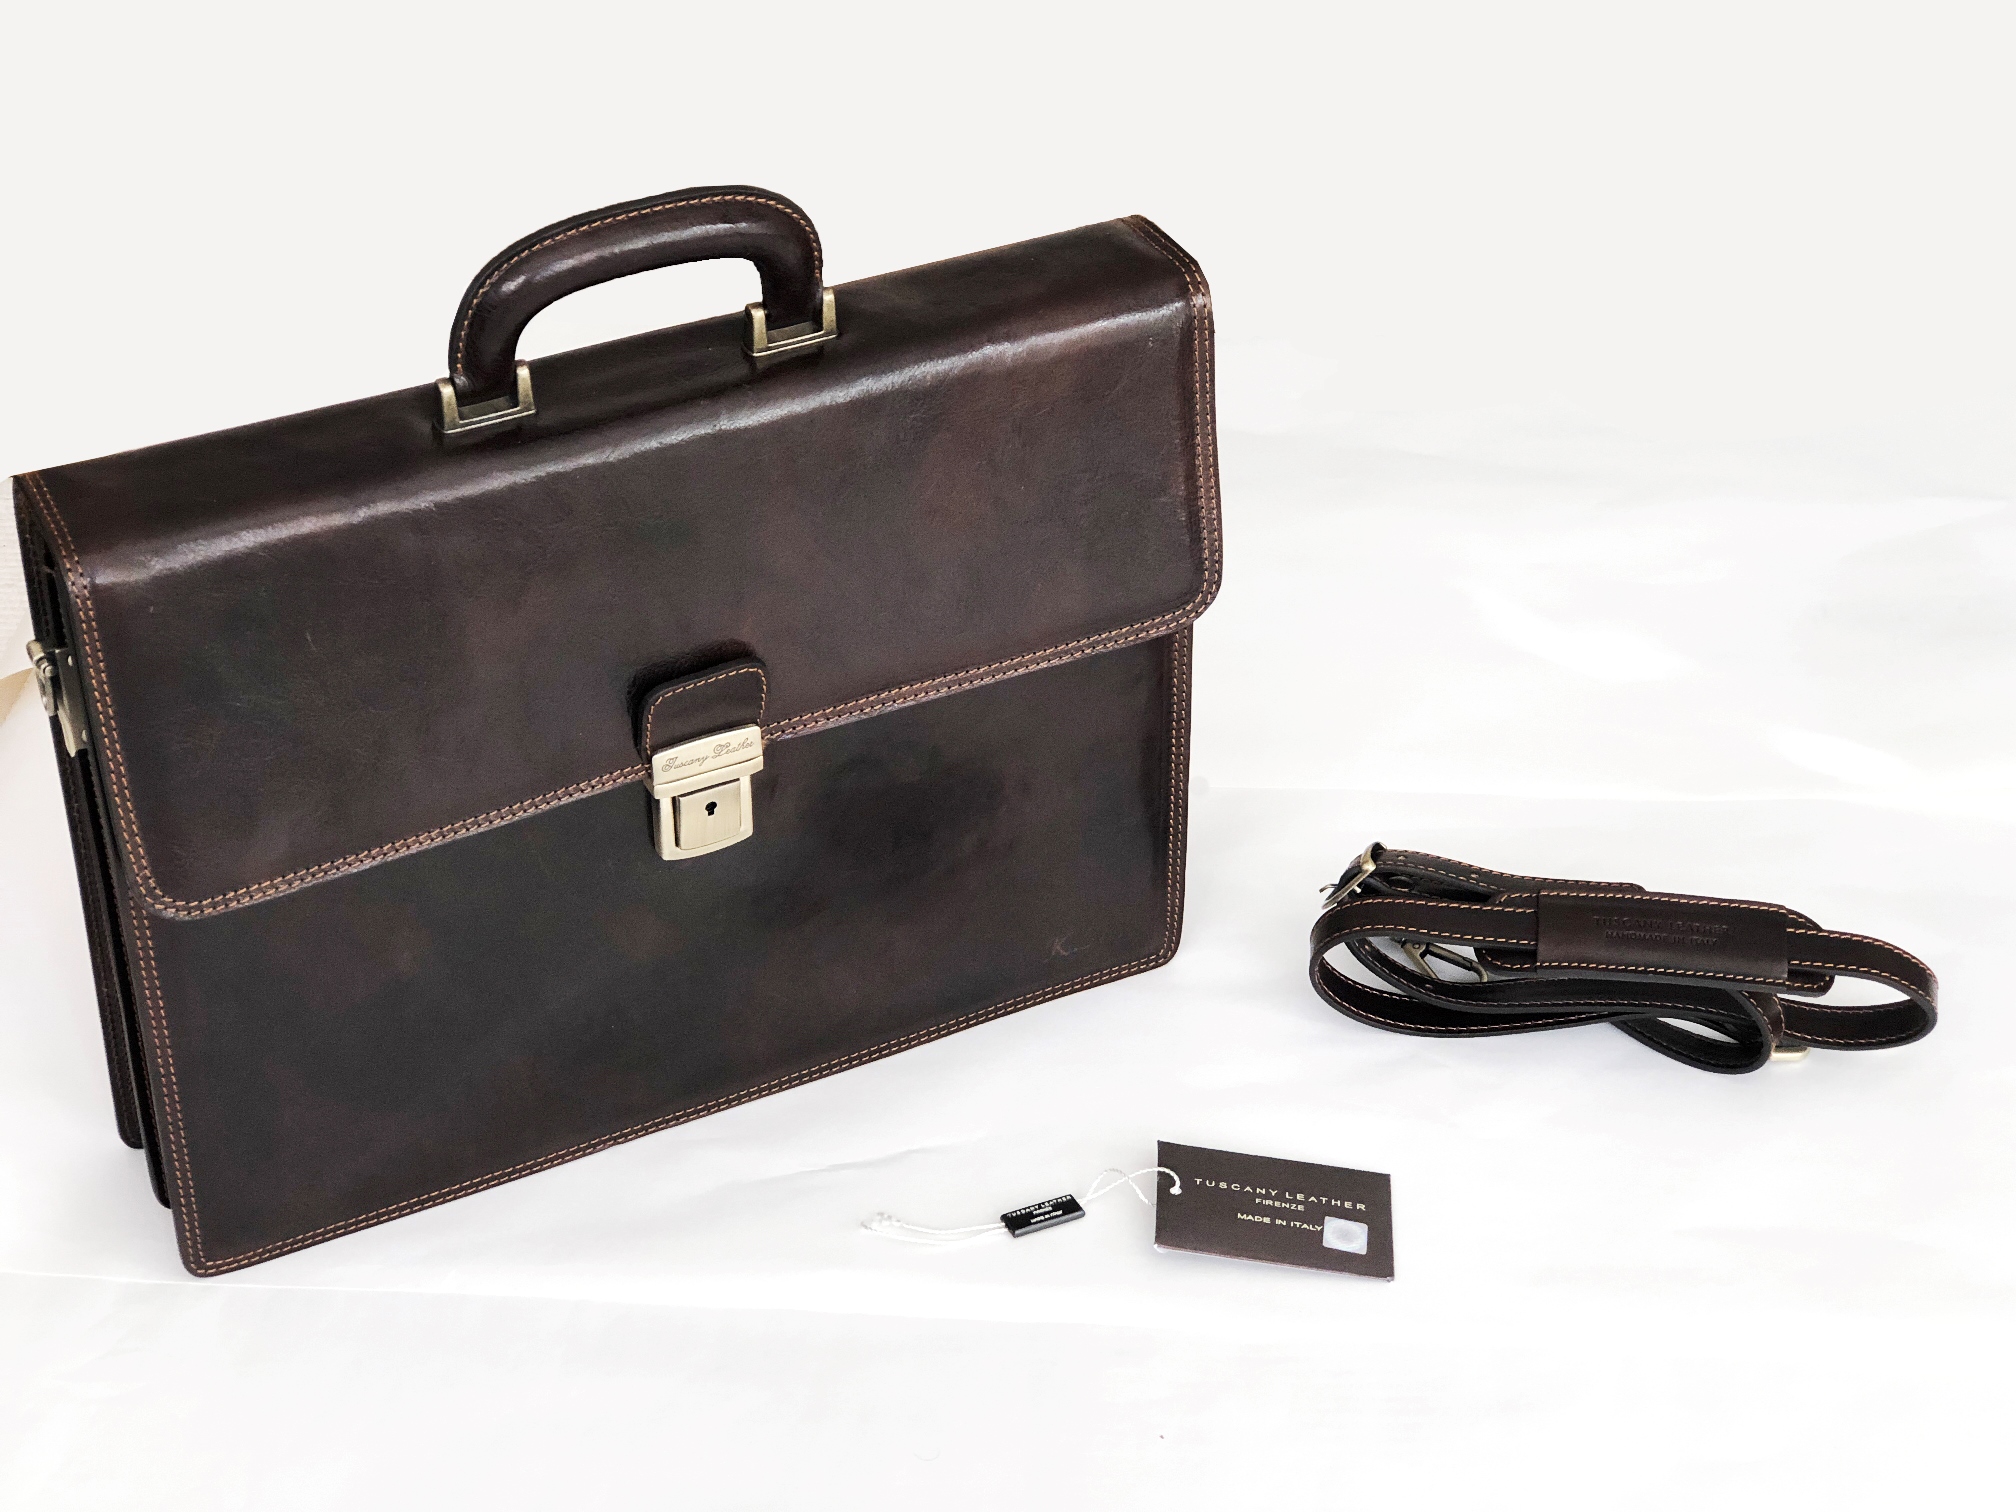 Tuscany Leather Briefcase Review - Italian Vintage Luxury